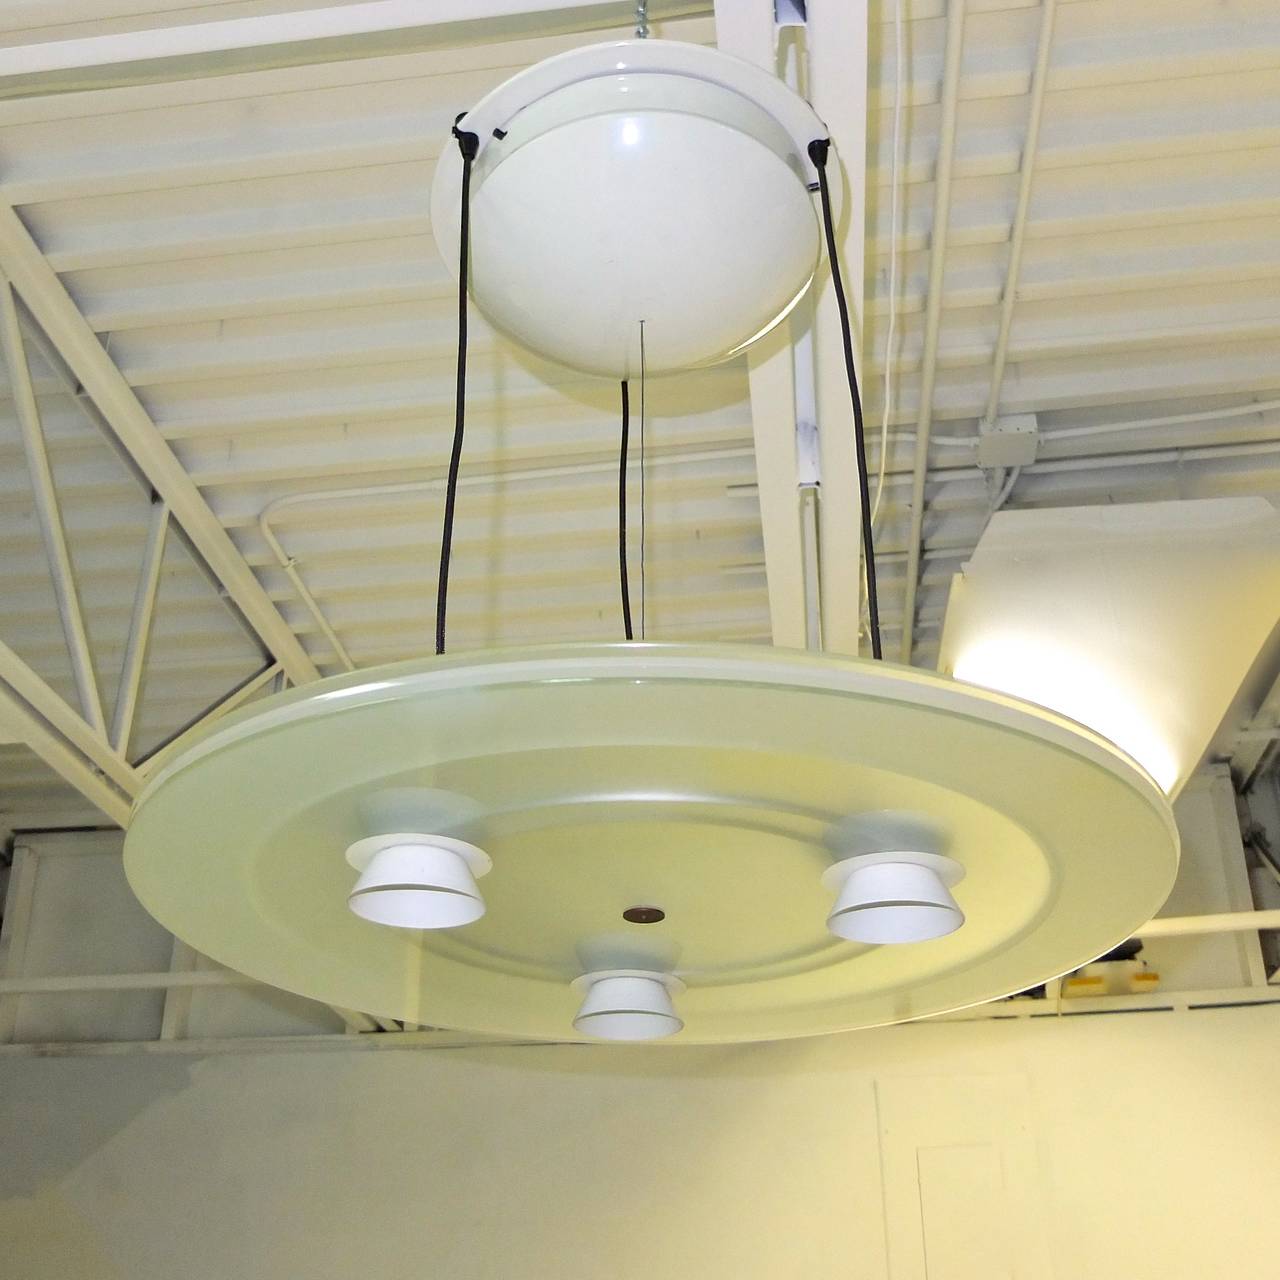 This is the Aurora pendant in the very rare color white.  It also came in black and blue.

Perry King & Santiago Miranda designed the 'Aurora' pendant light in 1982 for Arteluce, which became a division of FLOS.

The Aurora provides direct and